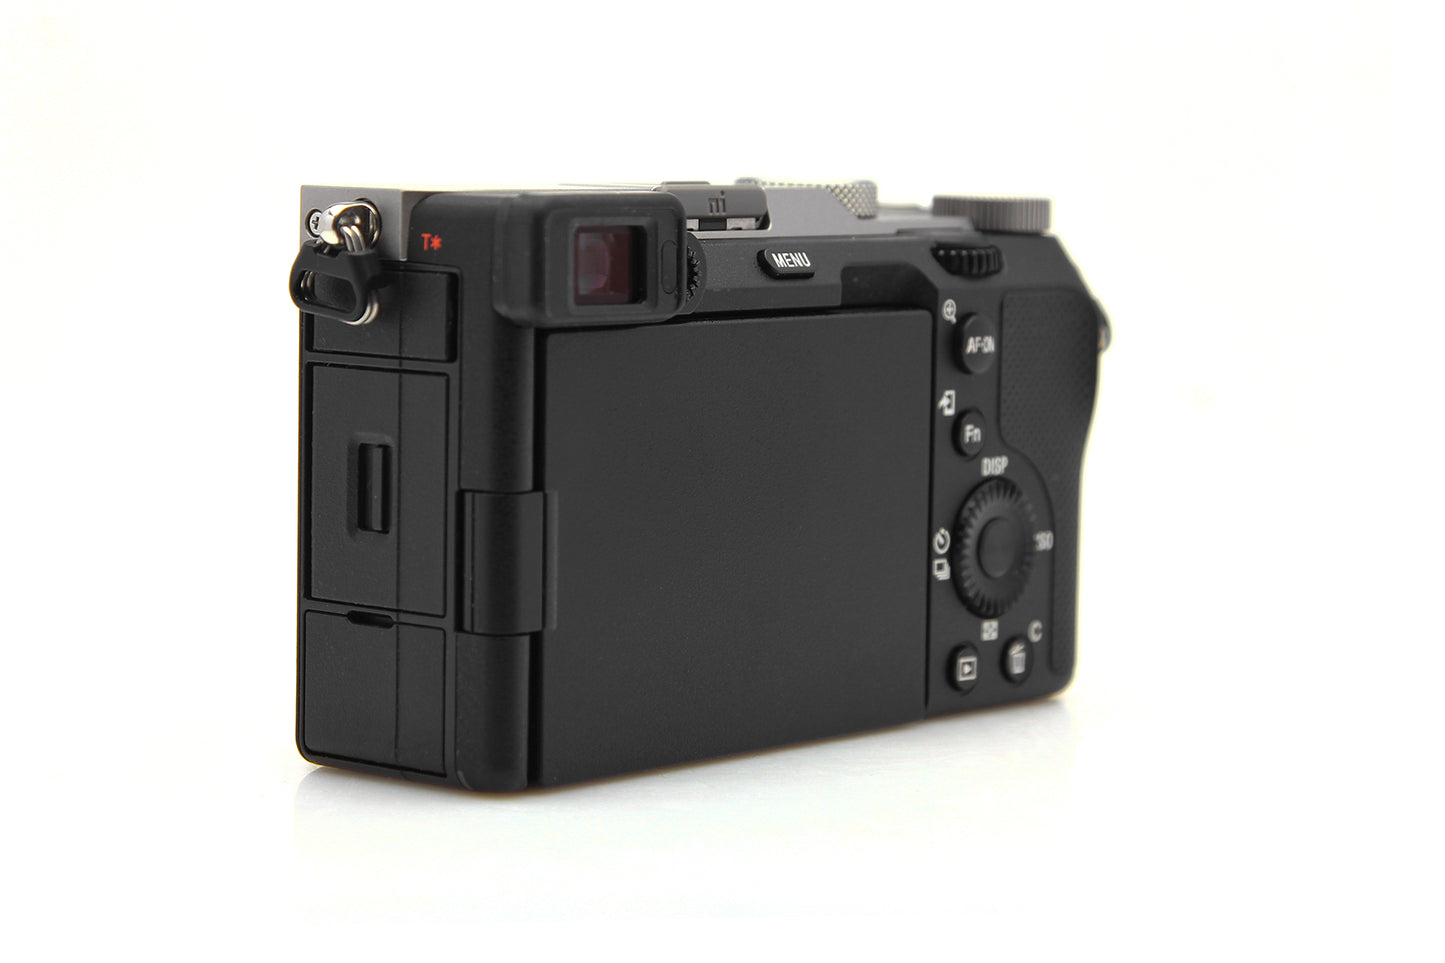 Used Sony A7C 25 Megapixel Mirrorless Camera body